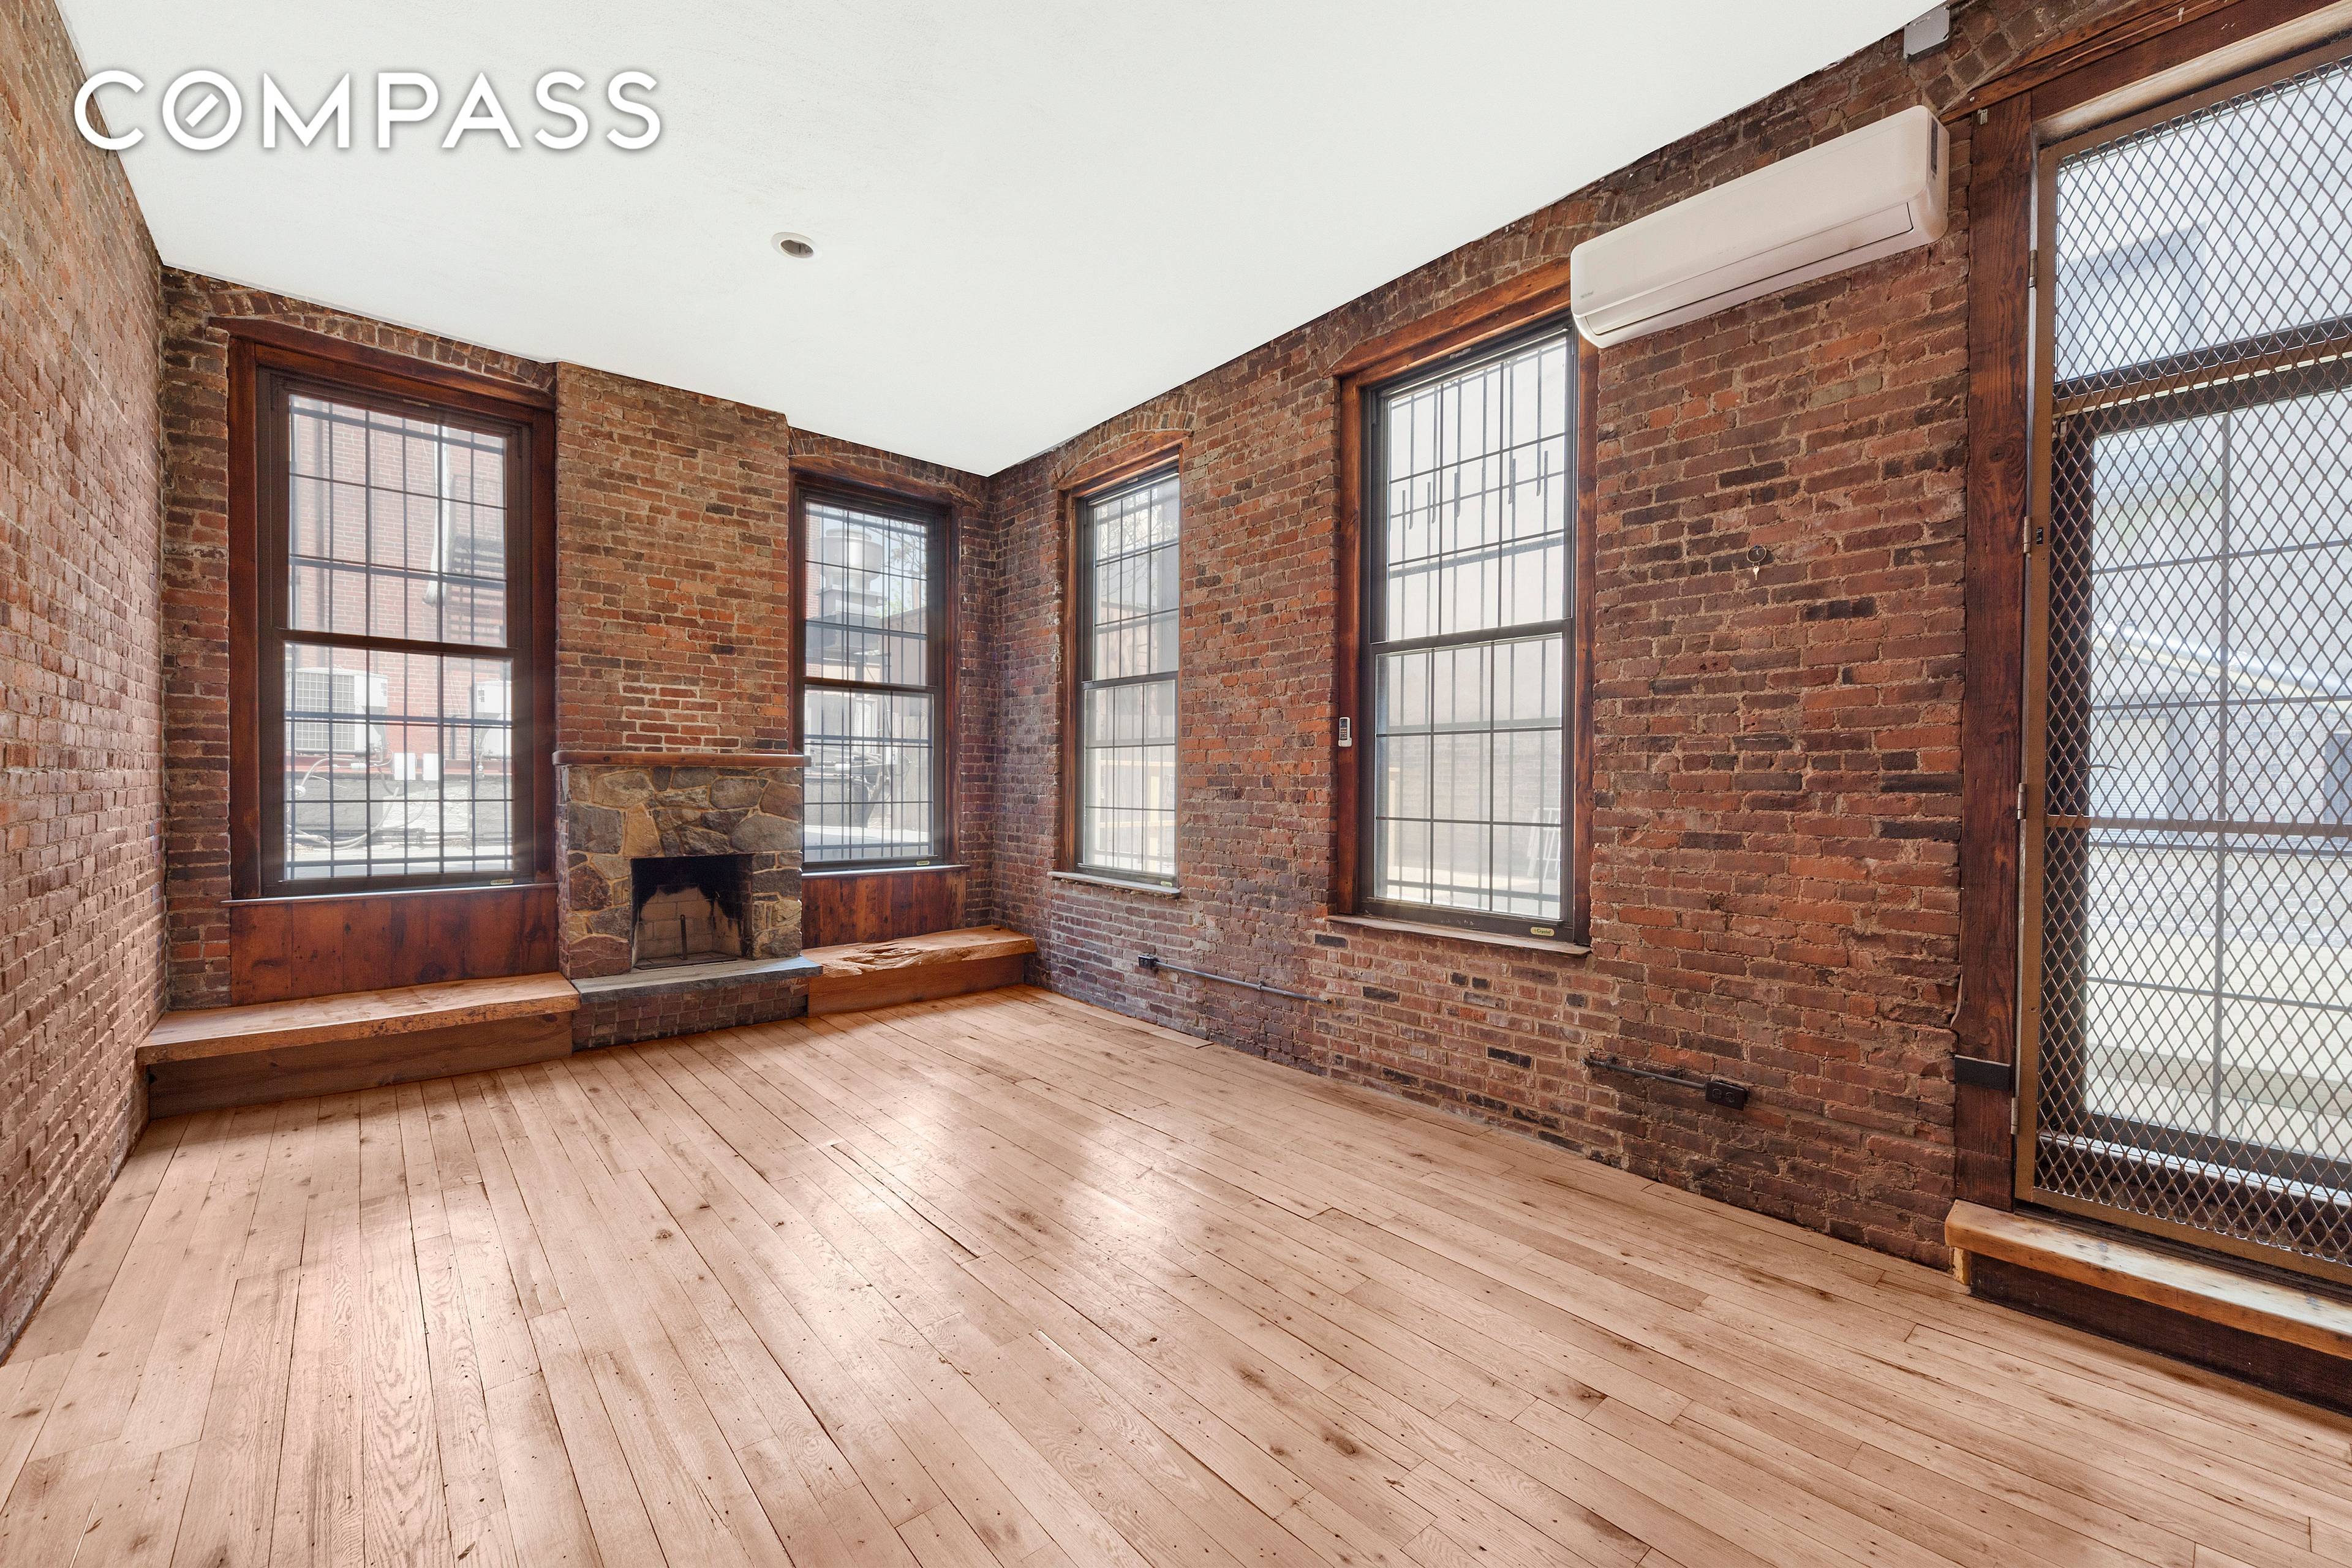 HUGE LOFT IN THE HEART OF THE EAST VILLAGE Full floor with a private terrace and fireplace.